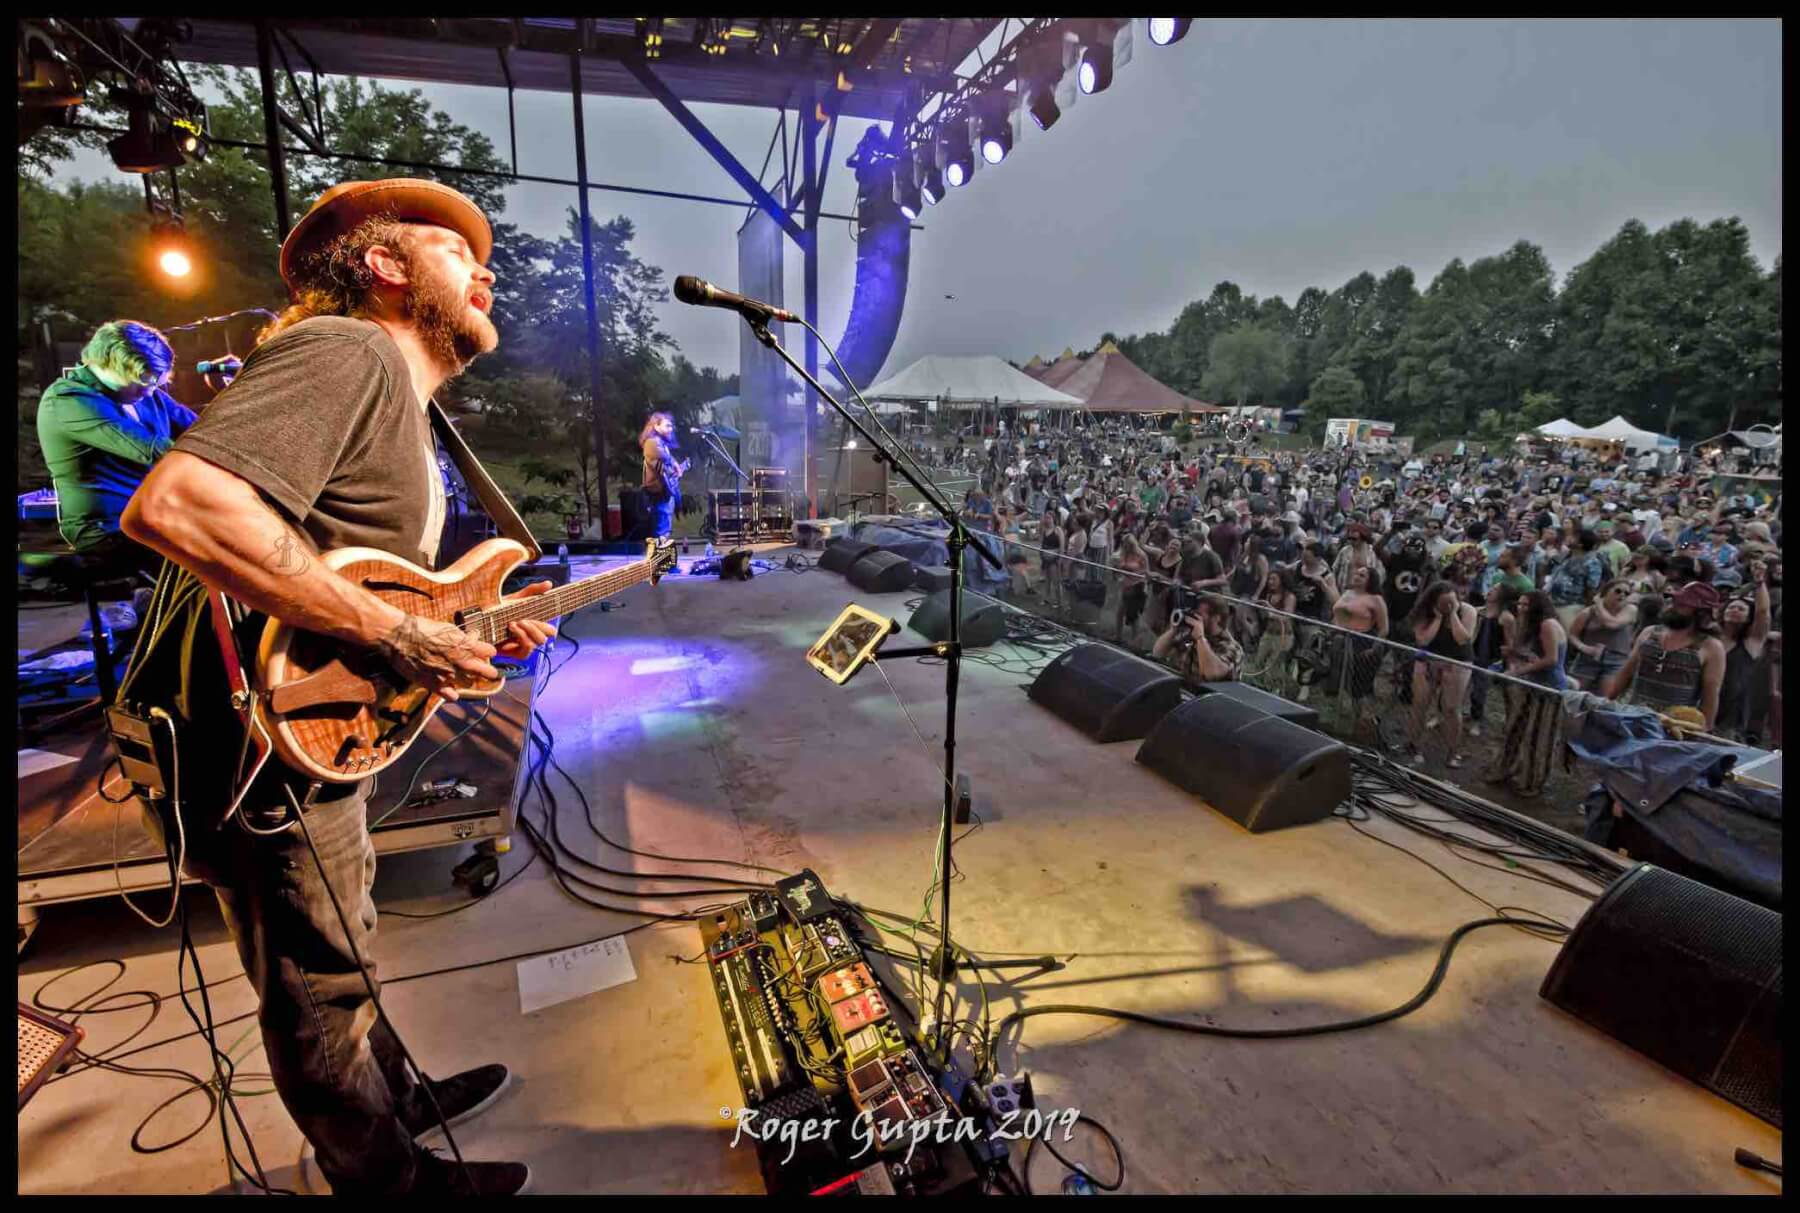 The Werks on main stage mountain music festival 2019